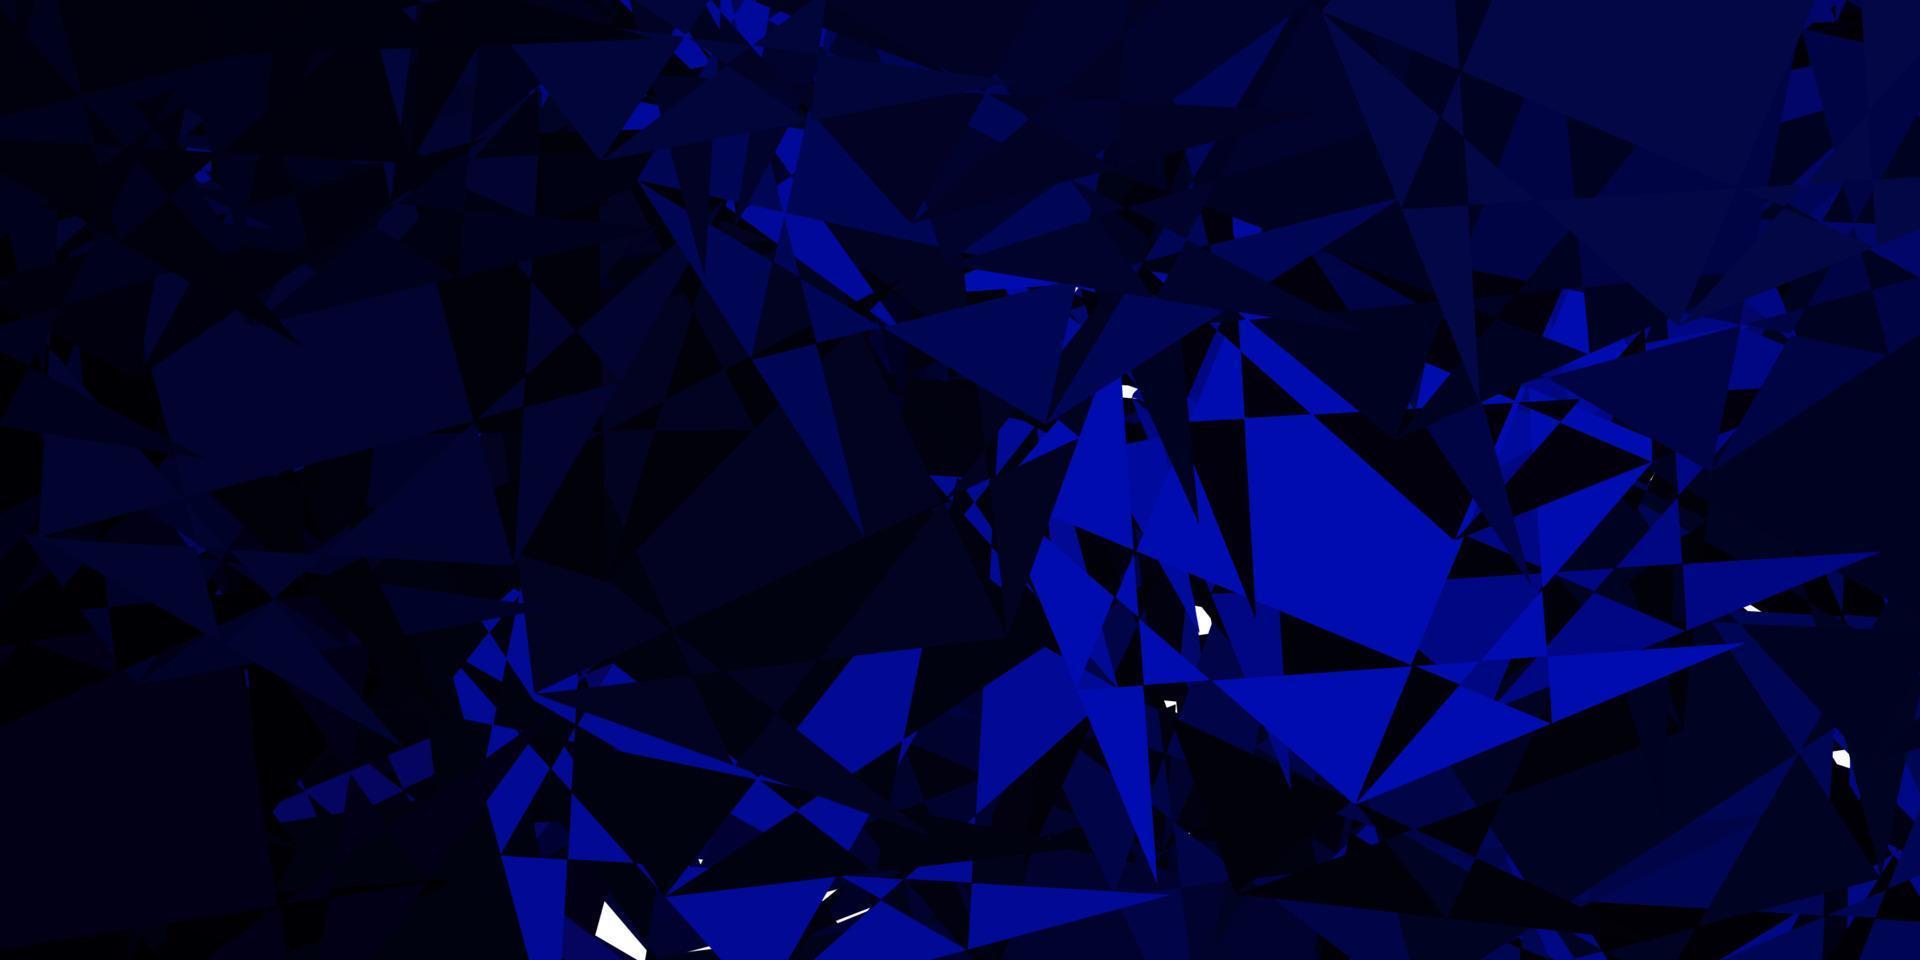 Dark BLUE vector background with polygonal forms.